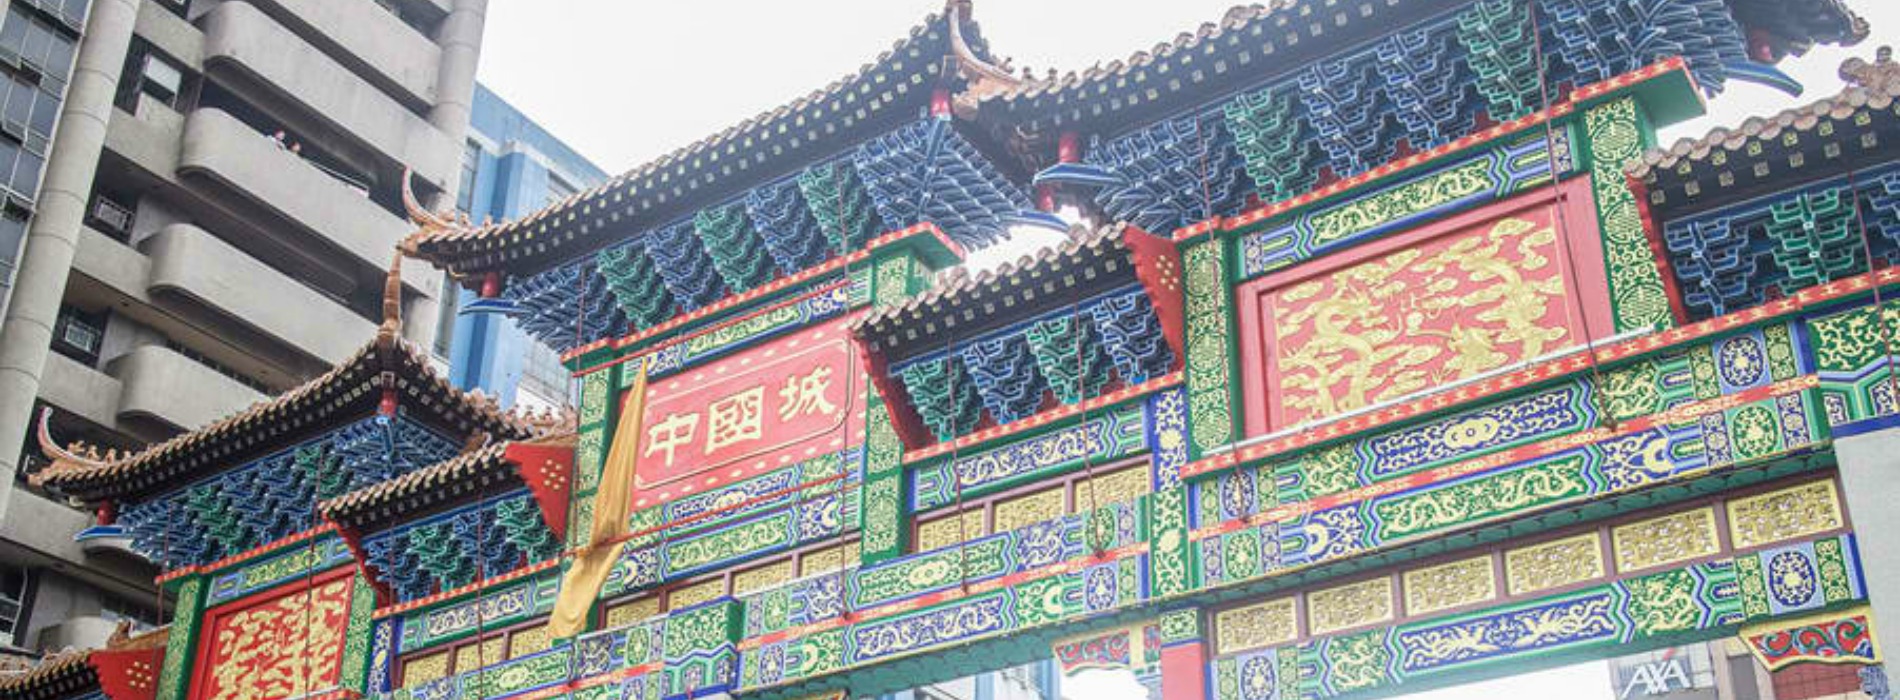 Local Chinese community unhappy about world's largest Chinatown arch in